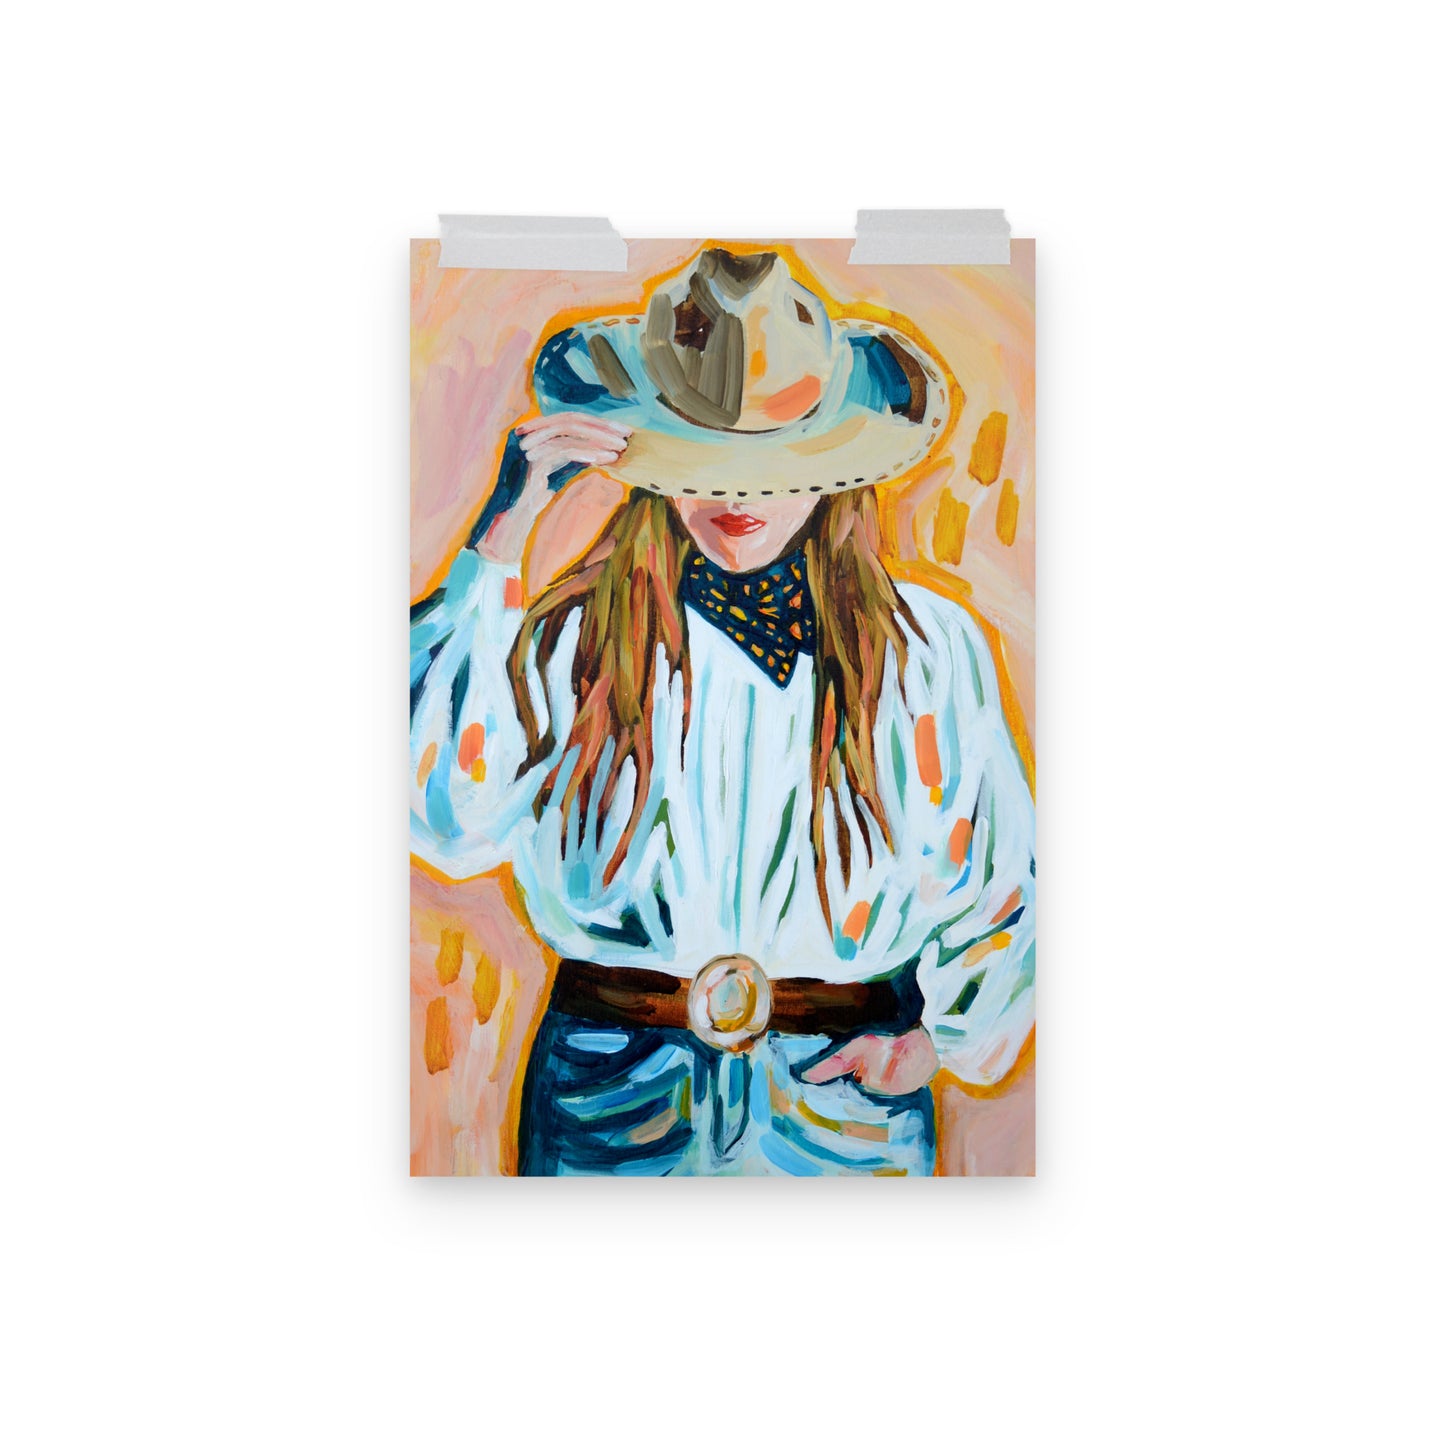 Cowgirl Western Archival Art Print with Cowboy Hat and Rodeo Queen Painting